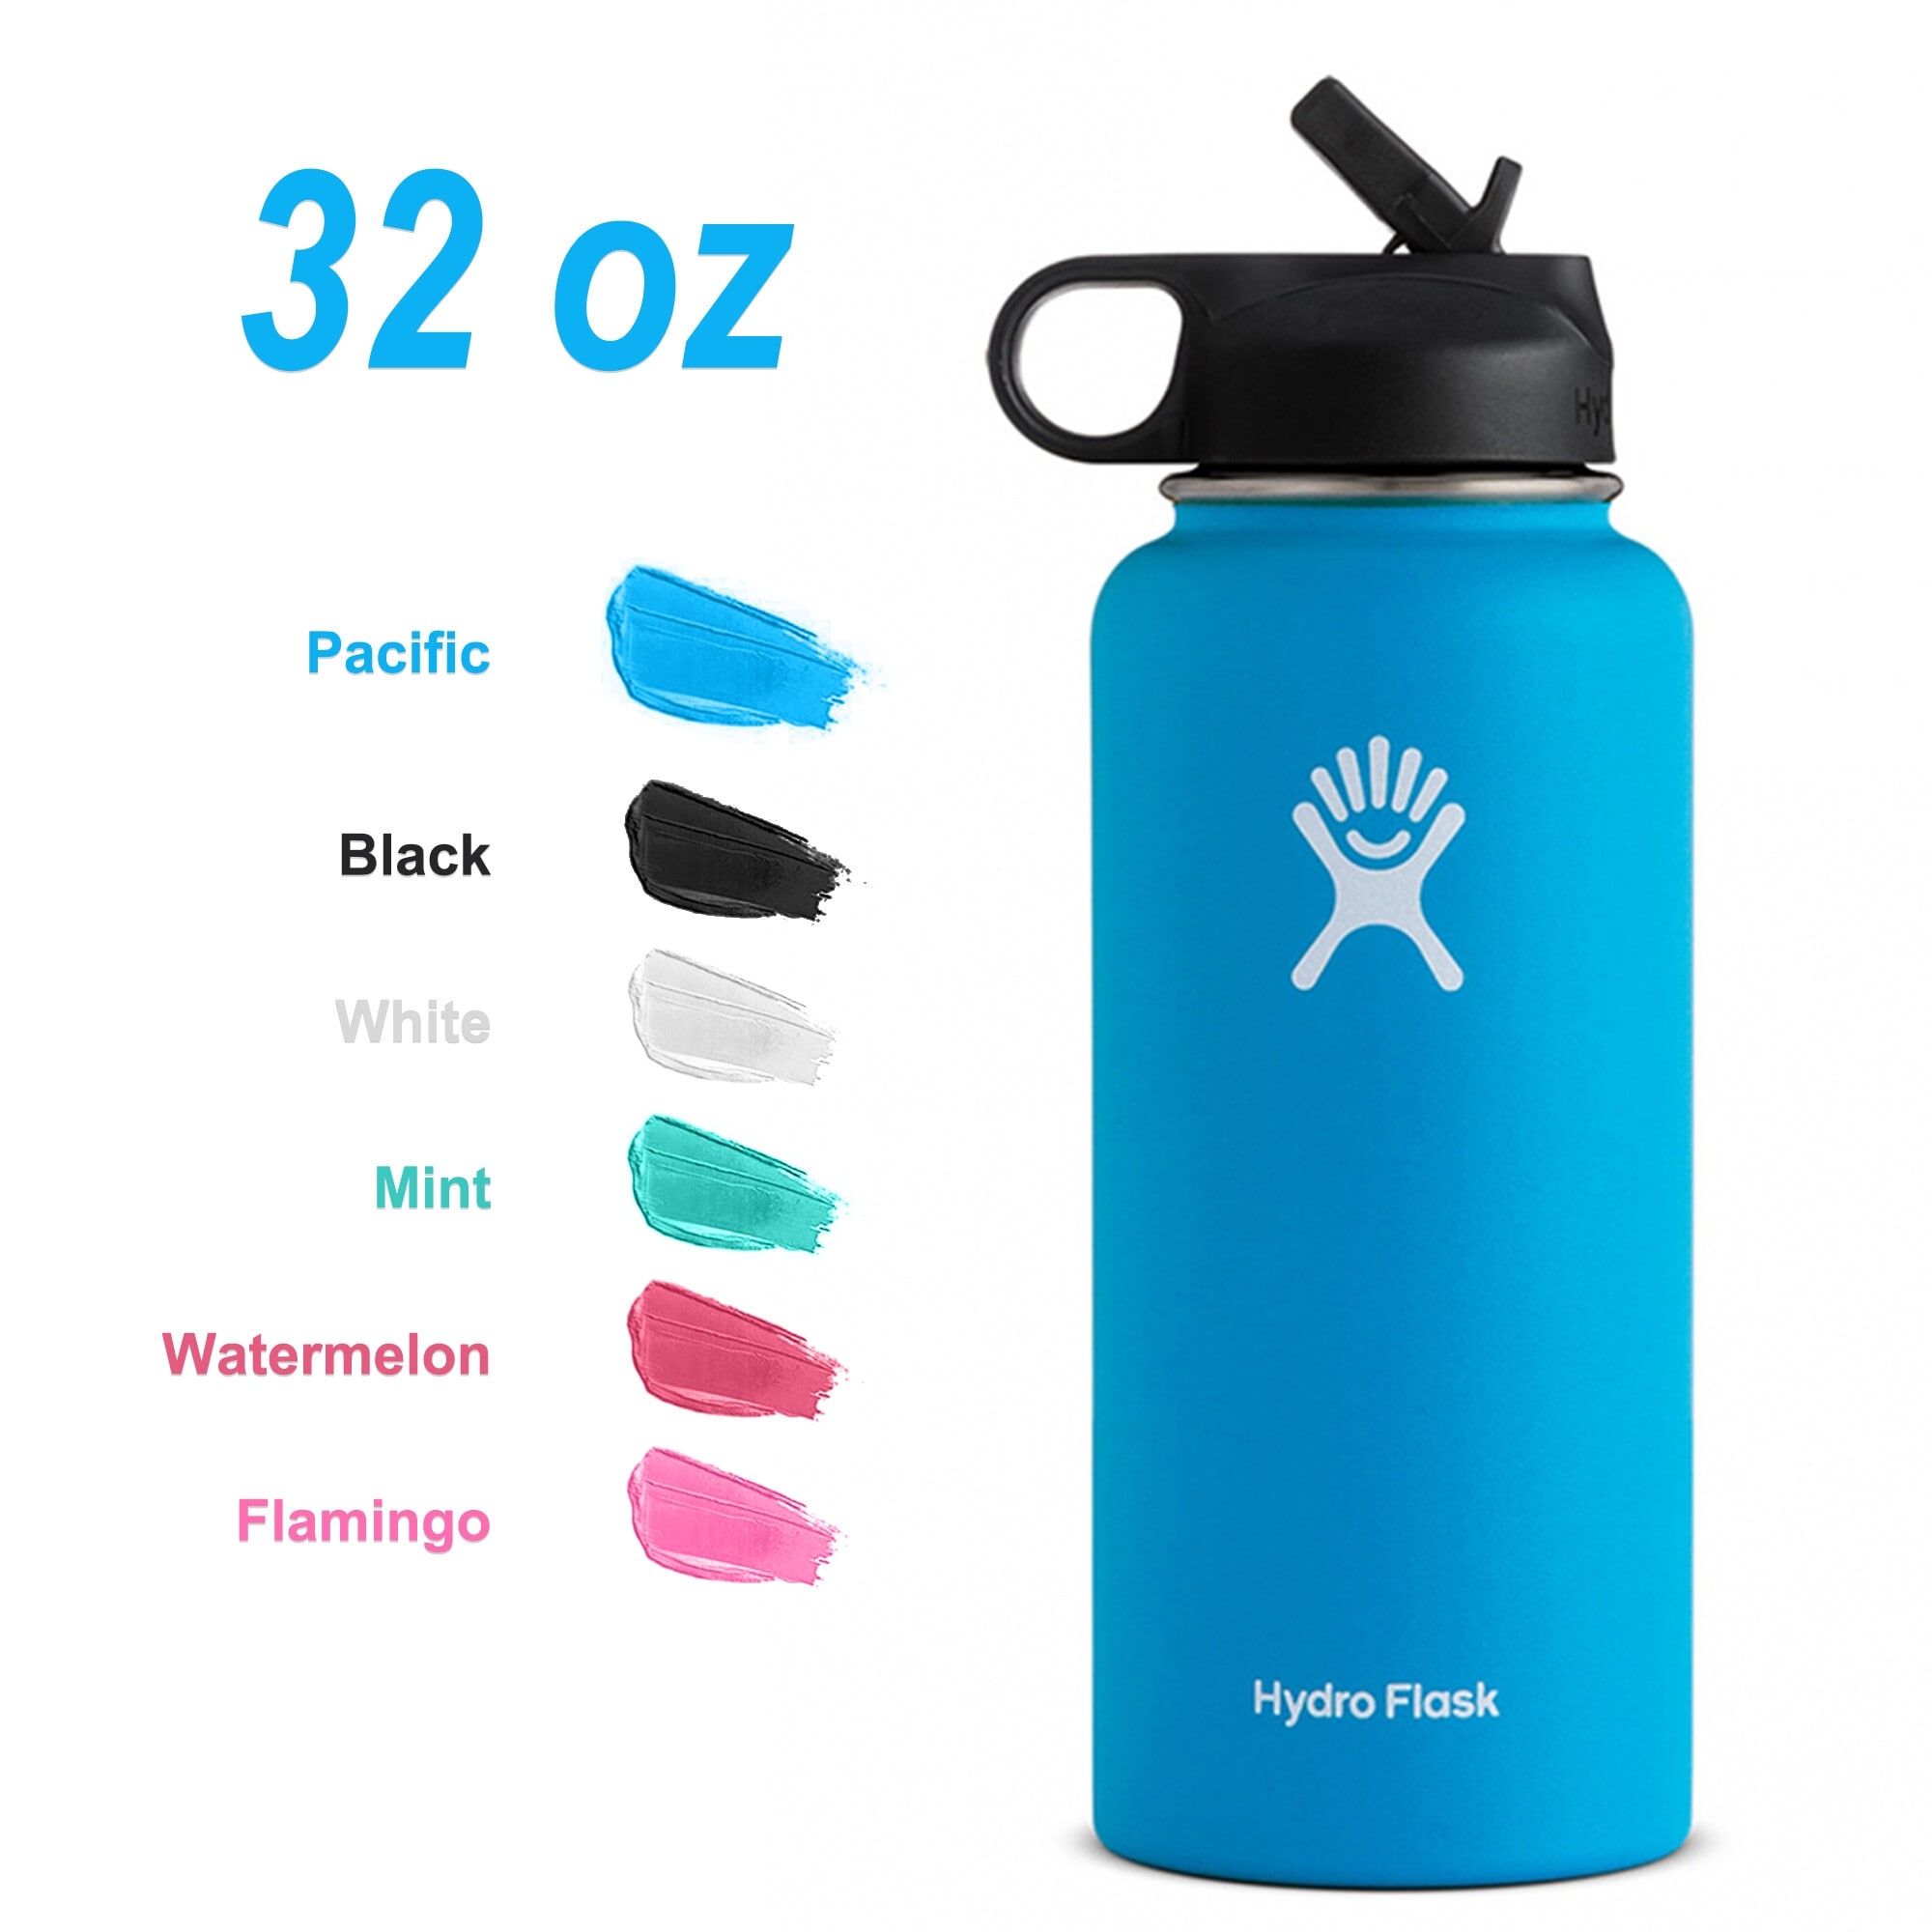 https://ak1.ostkcdn.com/images/products/is/images/direct/0c186b5be823b9dae7c9febf44234e714d3d1384/Hydro-Flask-32oz-Vacuum-Insulated-Stainless-Steel-Water-Bottle-Wide-Mouth-with-Straw-Lid.jpg